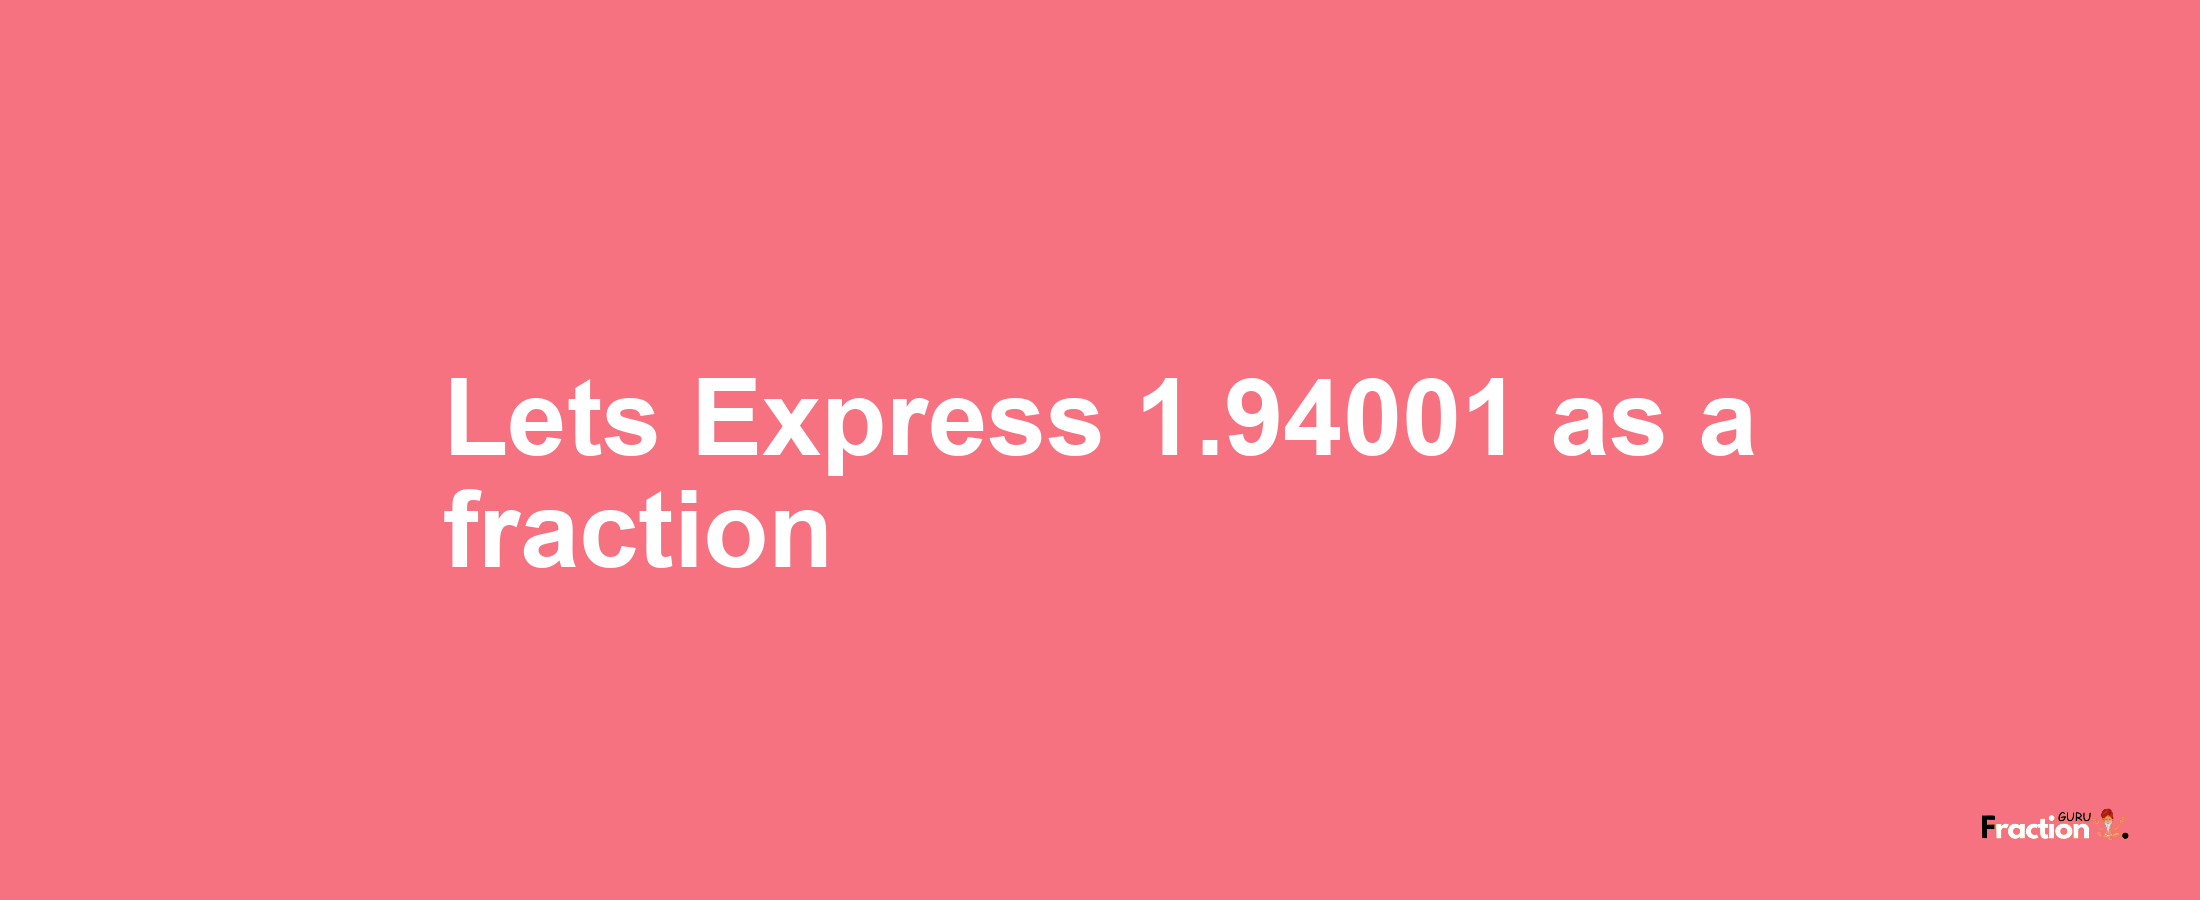 Lets Express 1.94001 as afraction